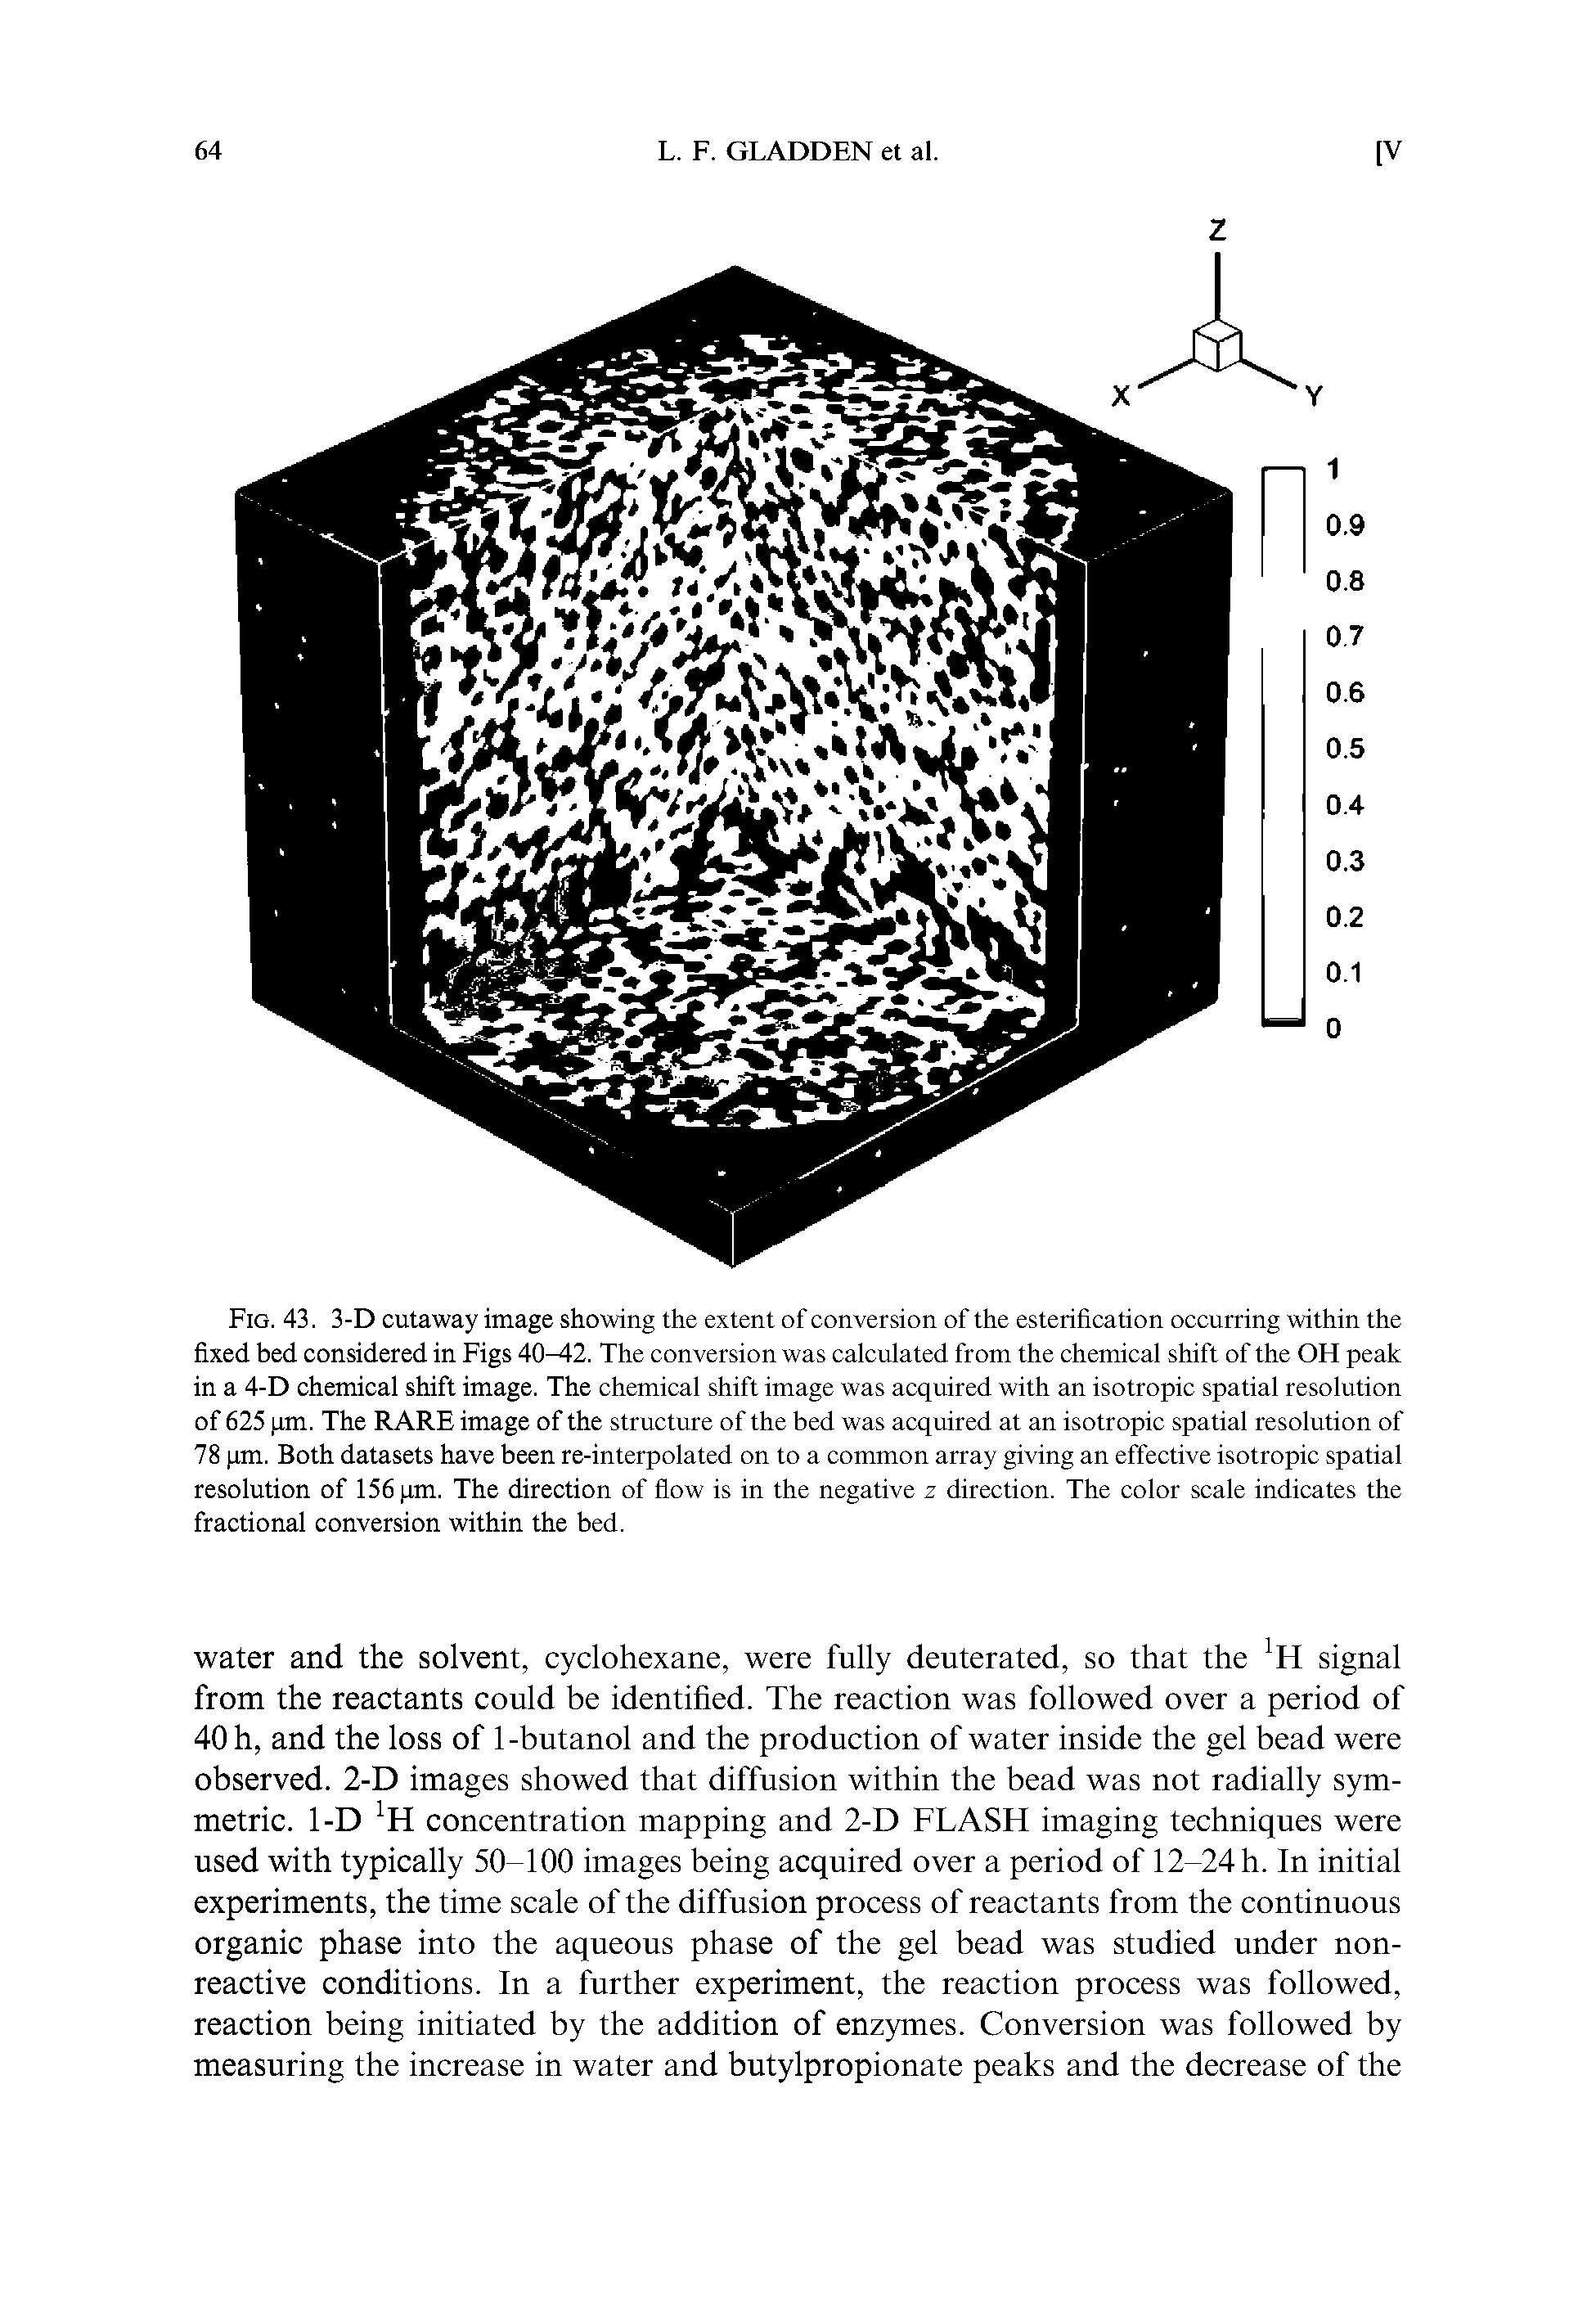 Fig. 43. 3-D cutaway image showing the extent of conversion of the esterification occurring within the fixed bed considered in Figs 40 2. The conversion was calculated from the chemical shift of the OH peak in a 4-D chemical shift image. The chemical shift image was acquired with an isotropic spatial resolution of 625 pm. The RARE image of the structure of the bed was acquired at an isotropic spatial resolution of 78 pm. Both datasets have been re-interpolated on to a common array giving an effective isotropic spatial resolution of 156 pm. The direction of flow is in the negative z direction. The color scale indicates the fractional conversion within the bed.